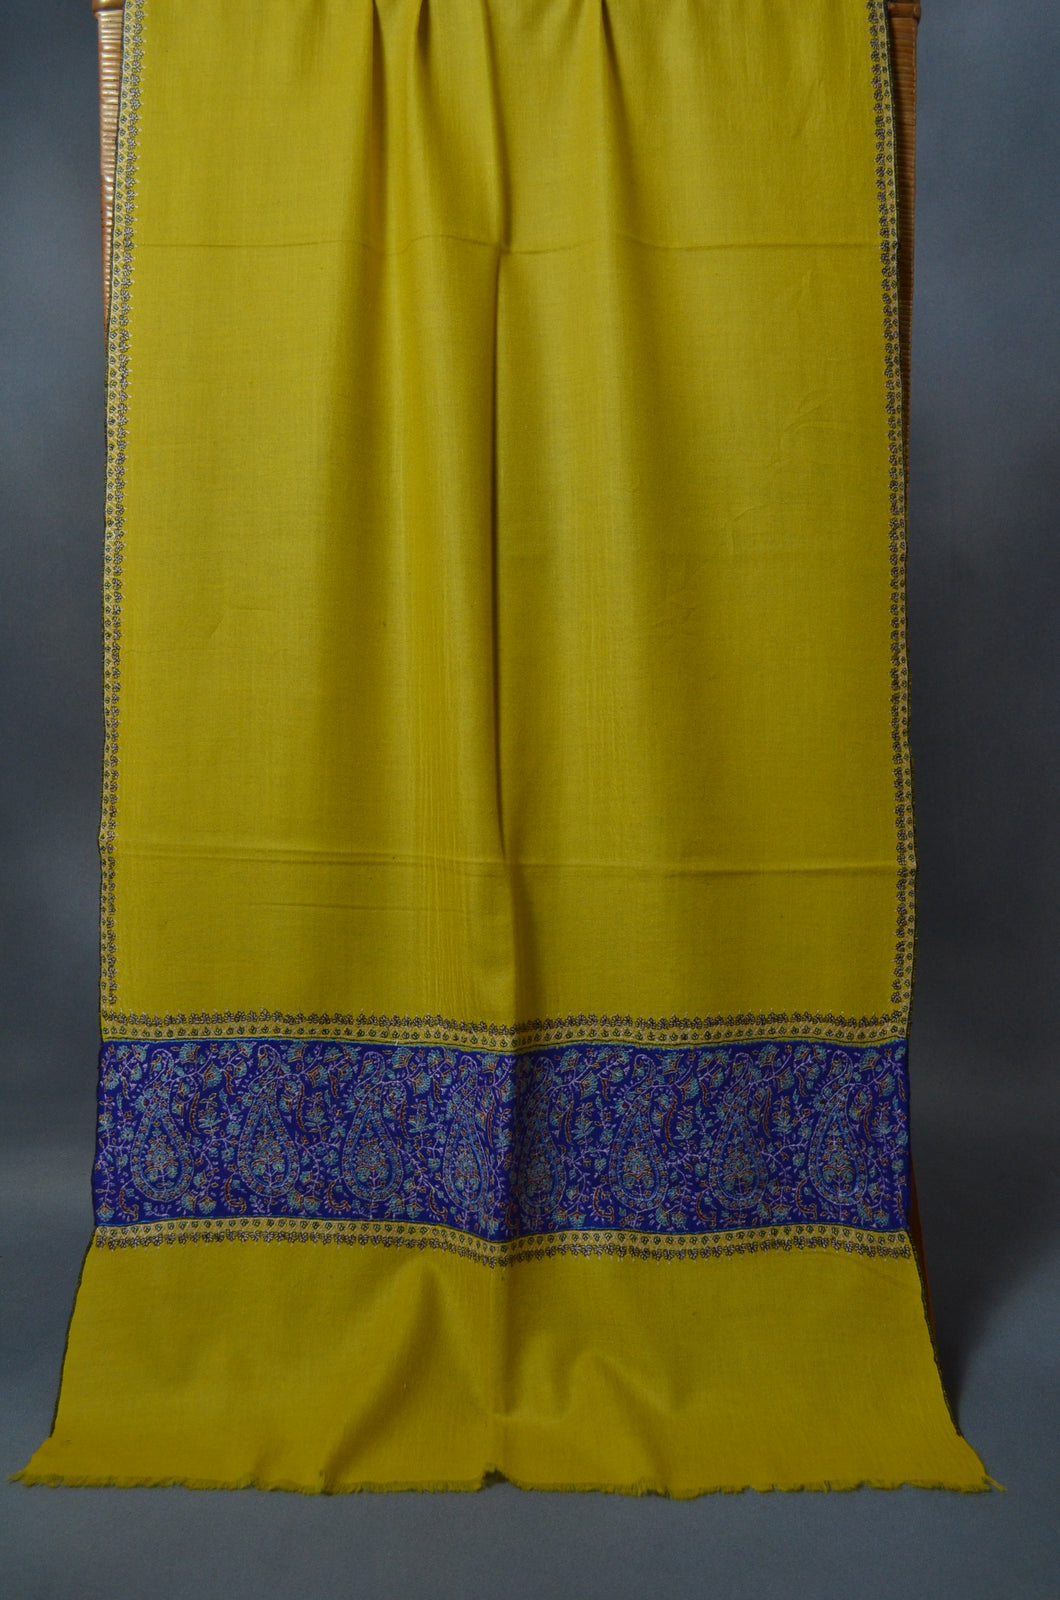 Yellow and Blue Big Border Embroidery Cashmere Pashmina Scarf